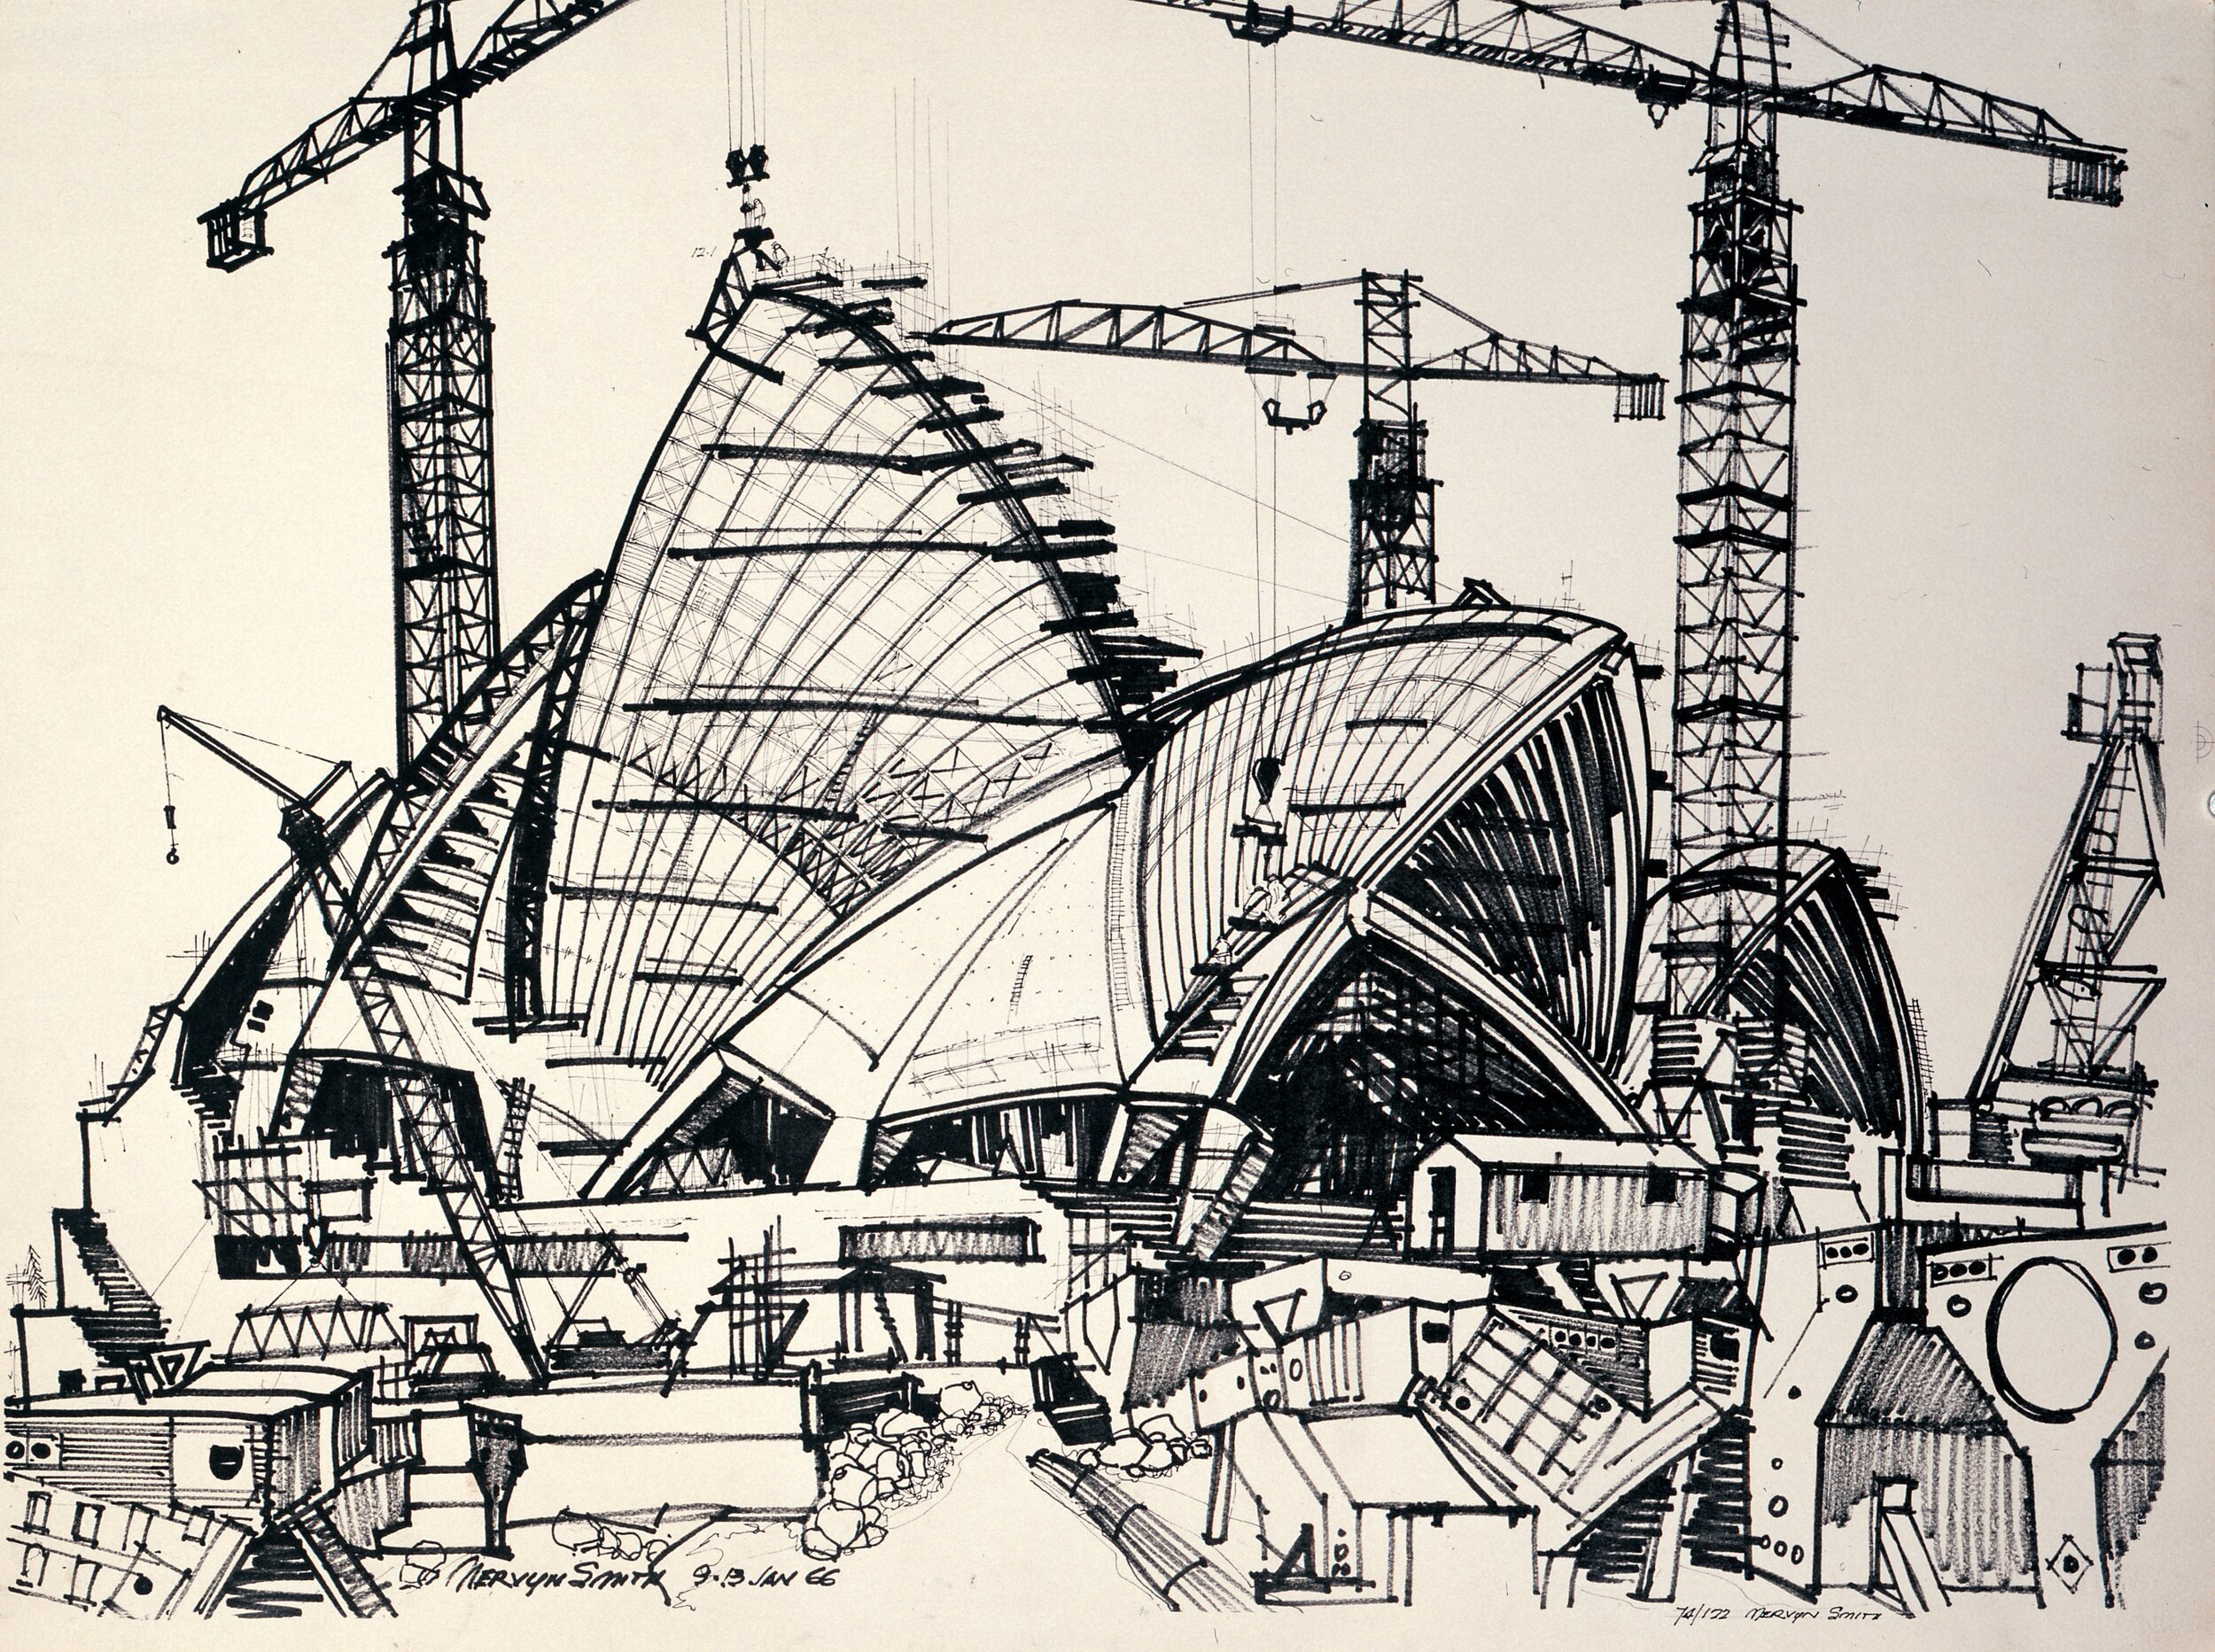 Drawing of the Sydney Opera House under construction. Artist: Mervyn Smith. Image Date: 1966. Source: RIBA